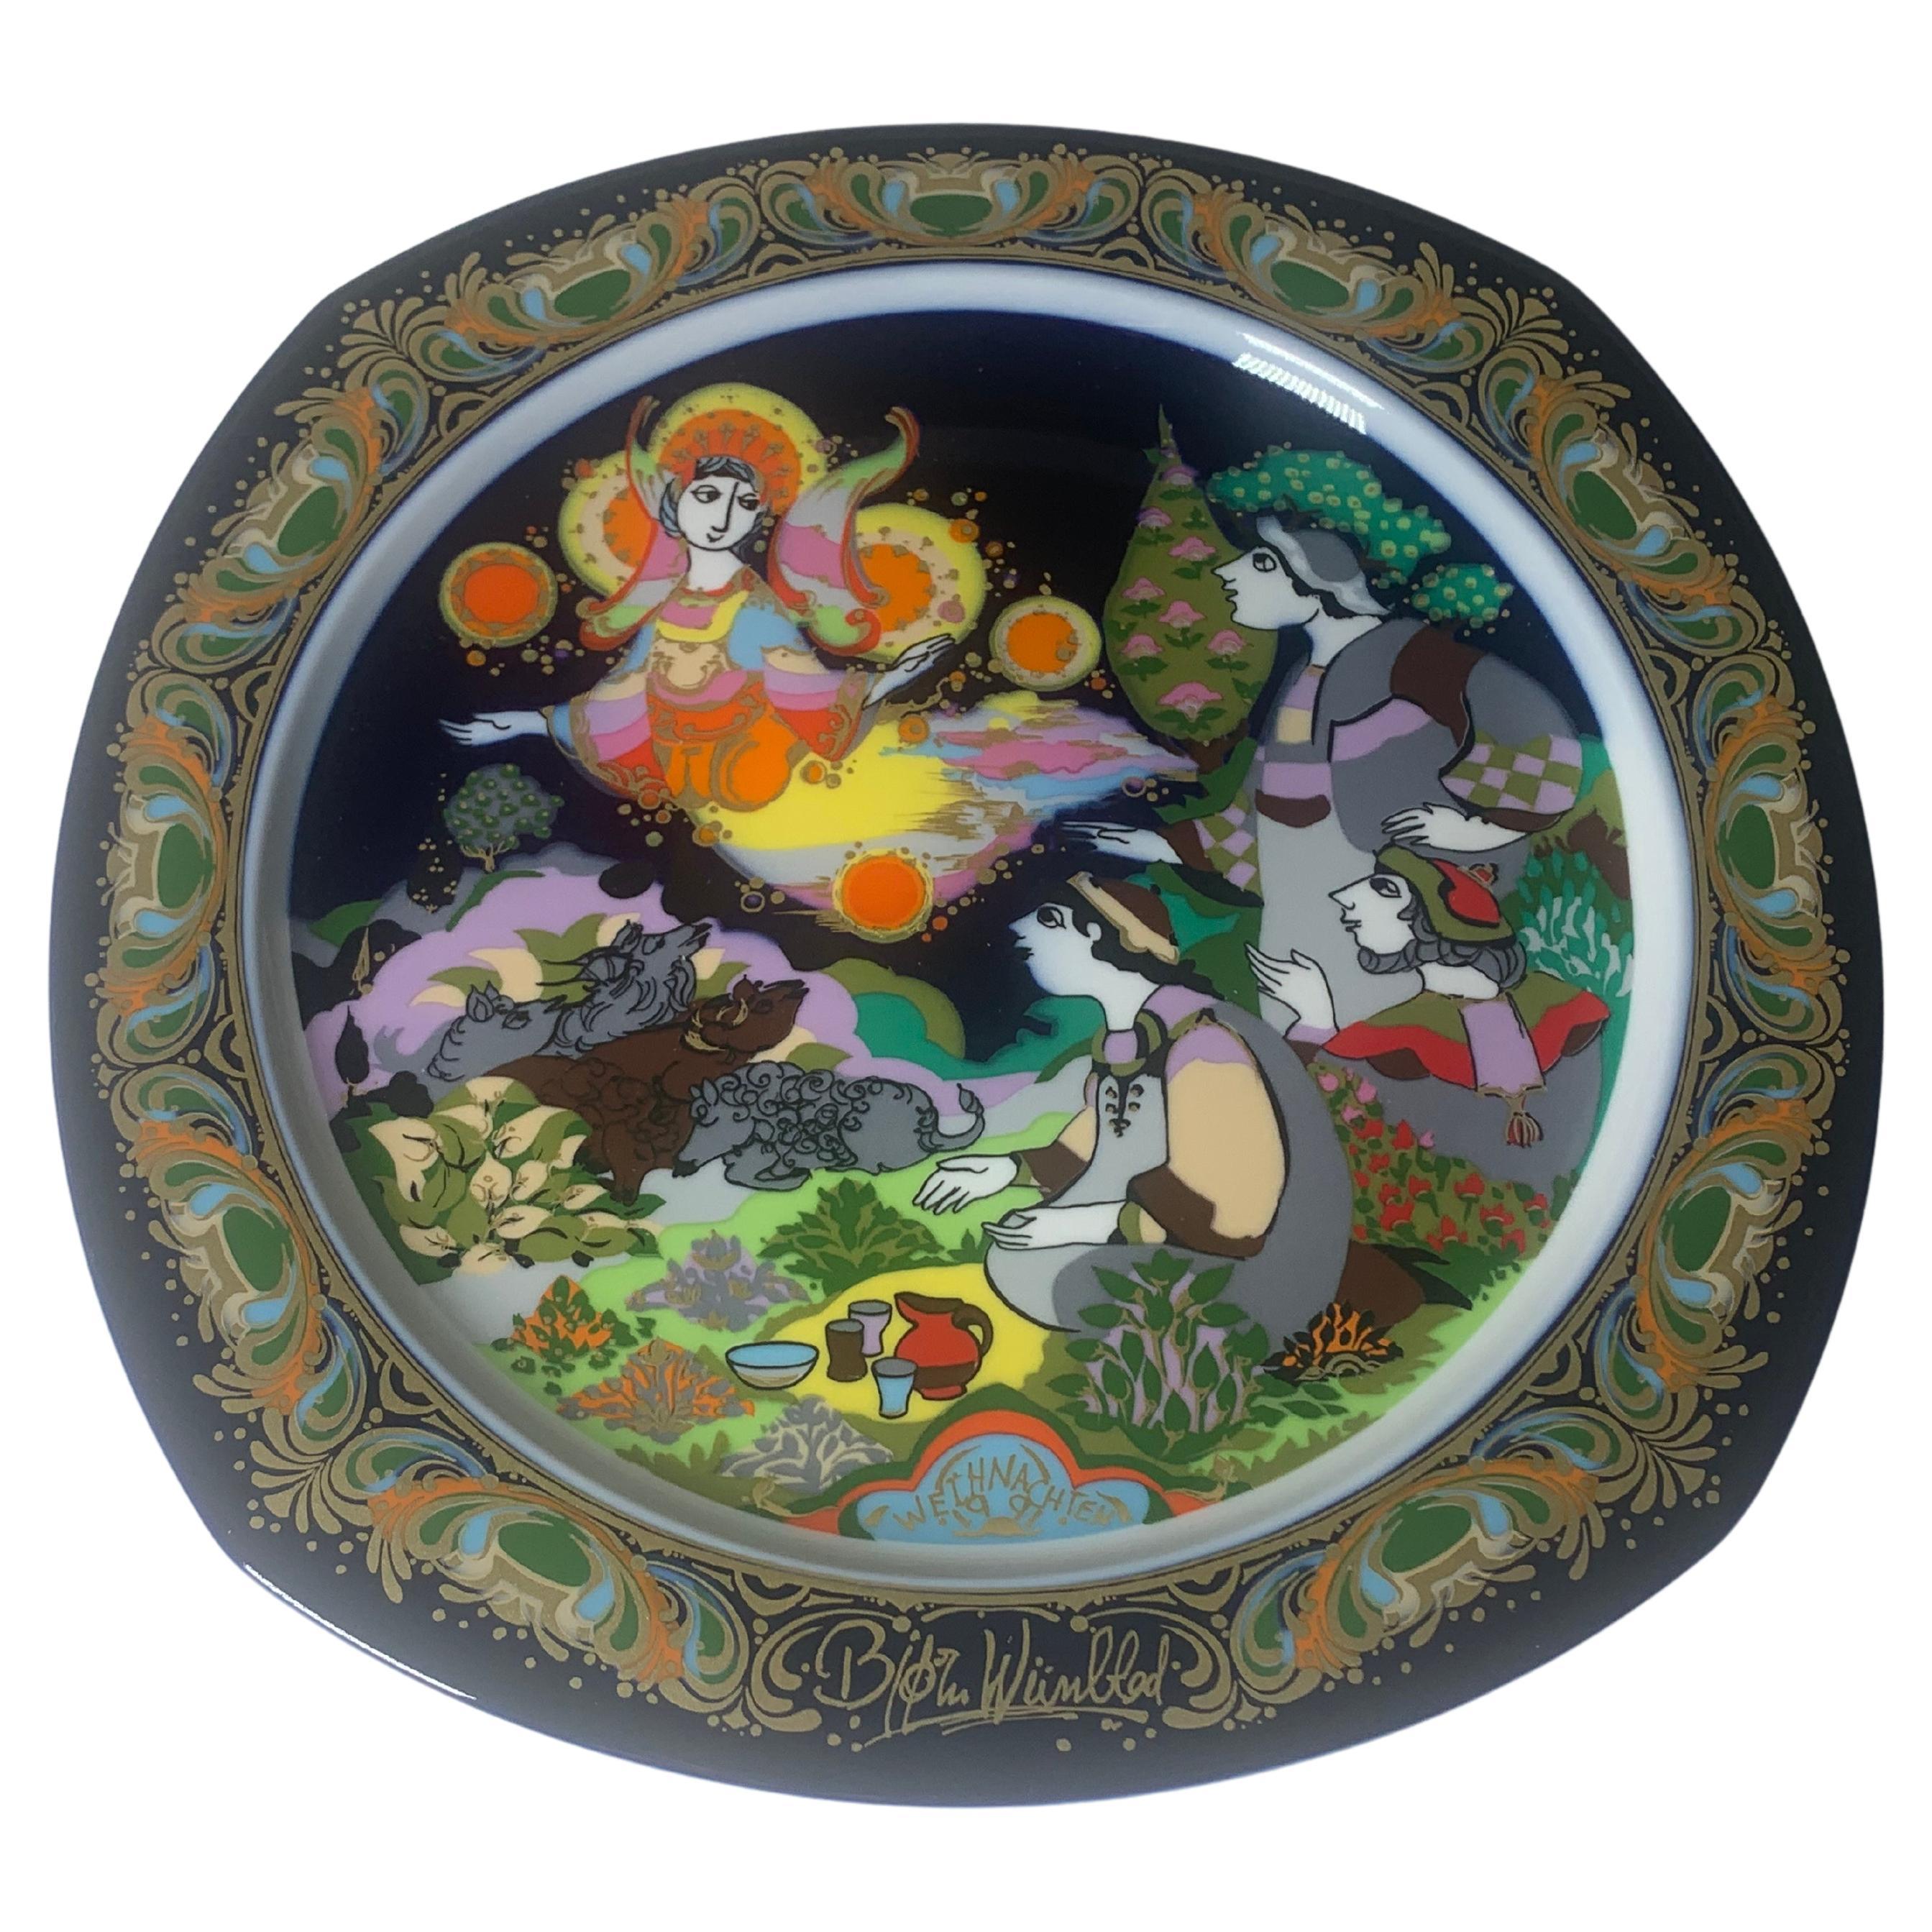 Christmas Songs Plate by Bjorn Wiinblad for Rosenthal from 1991